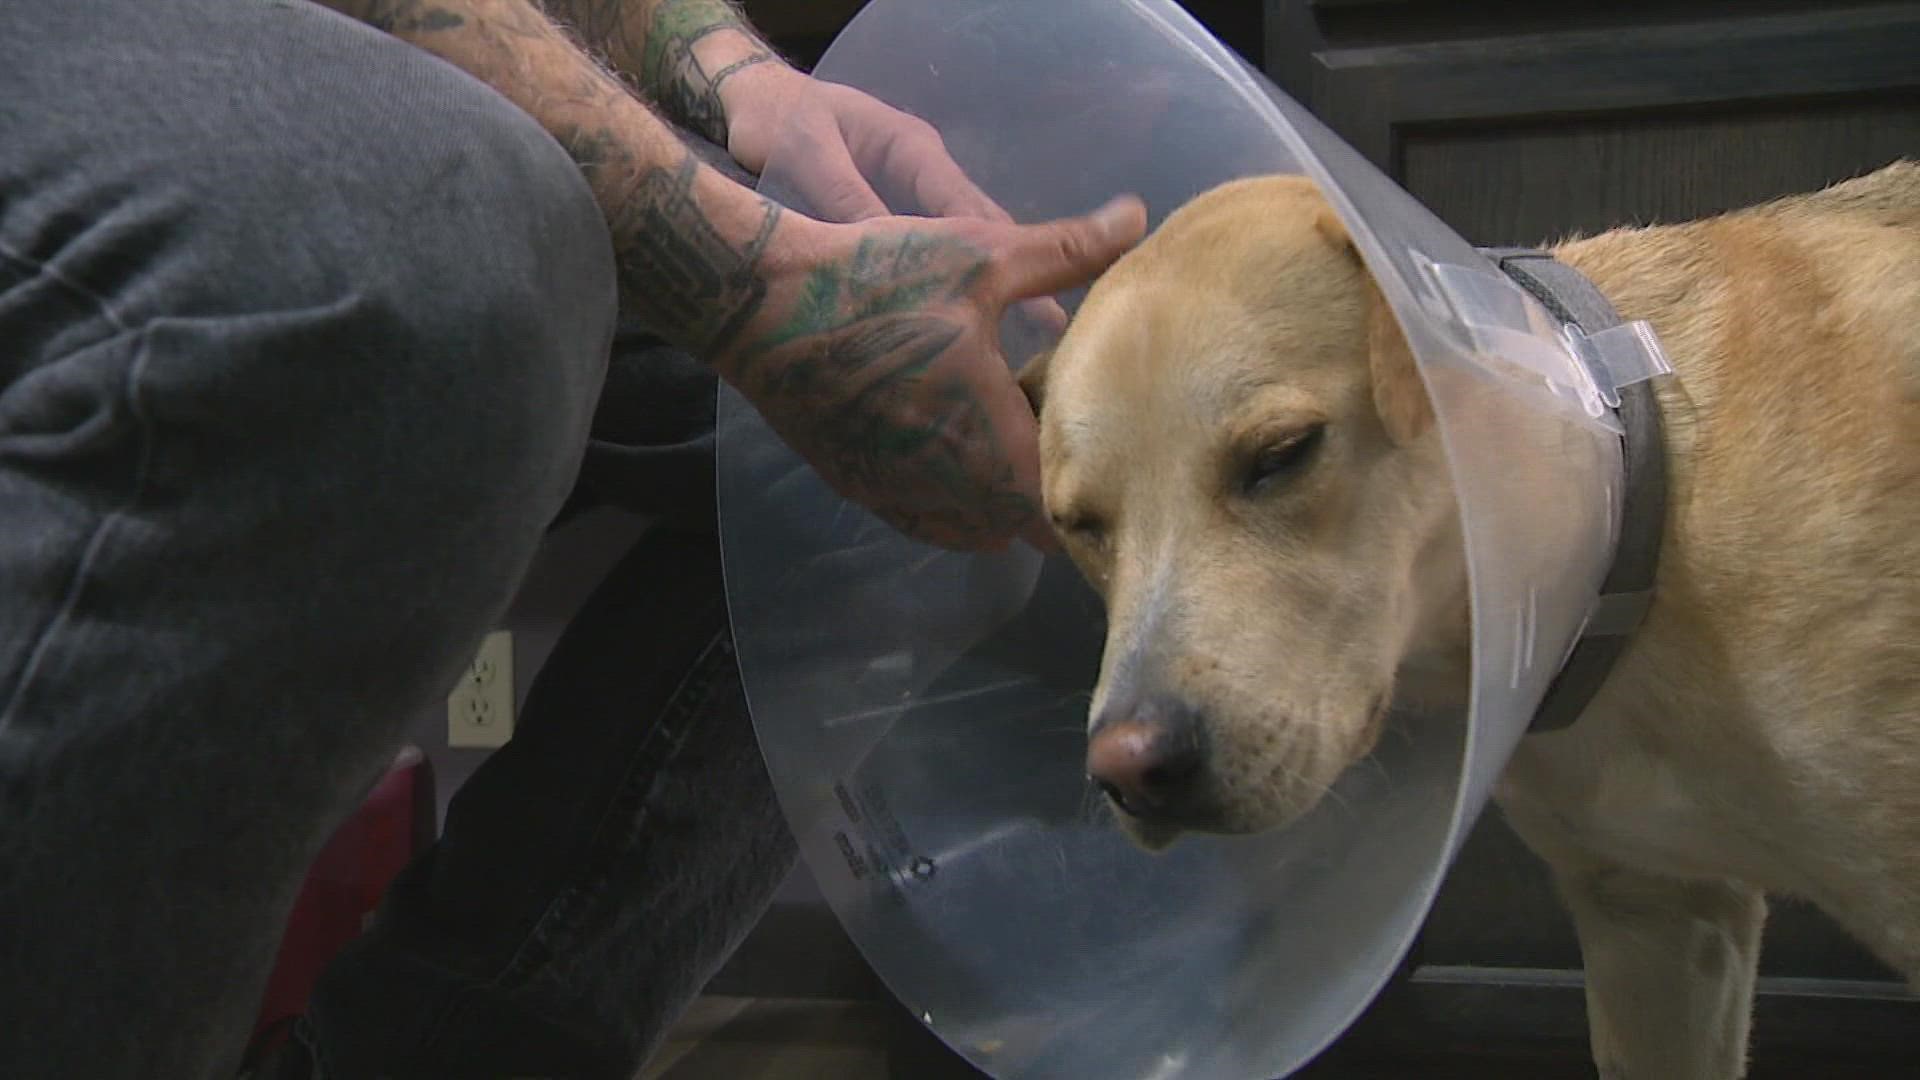 The 1-year-old dog was hit by a truck and abandoned by its owner.